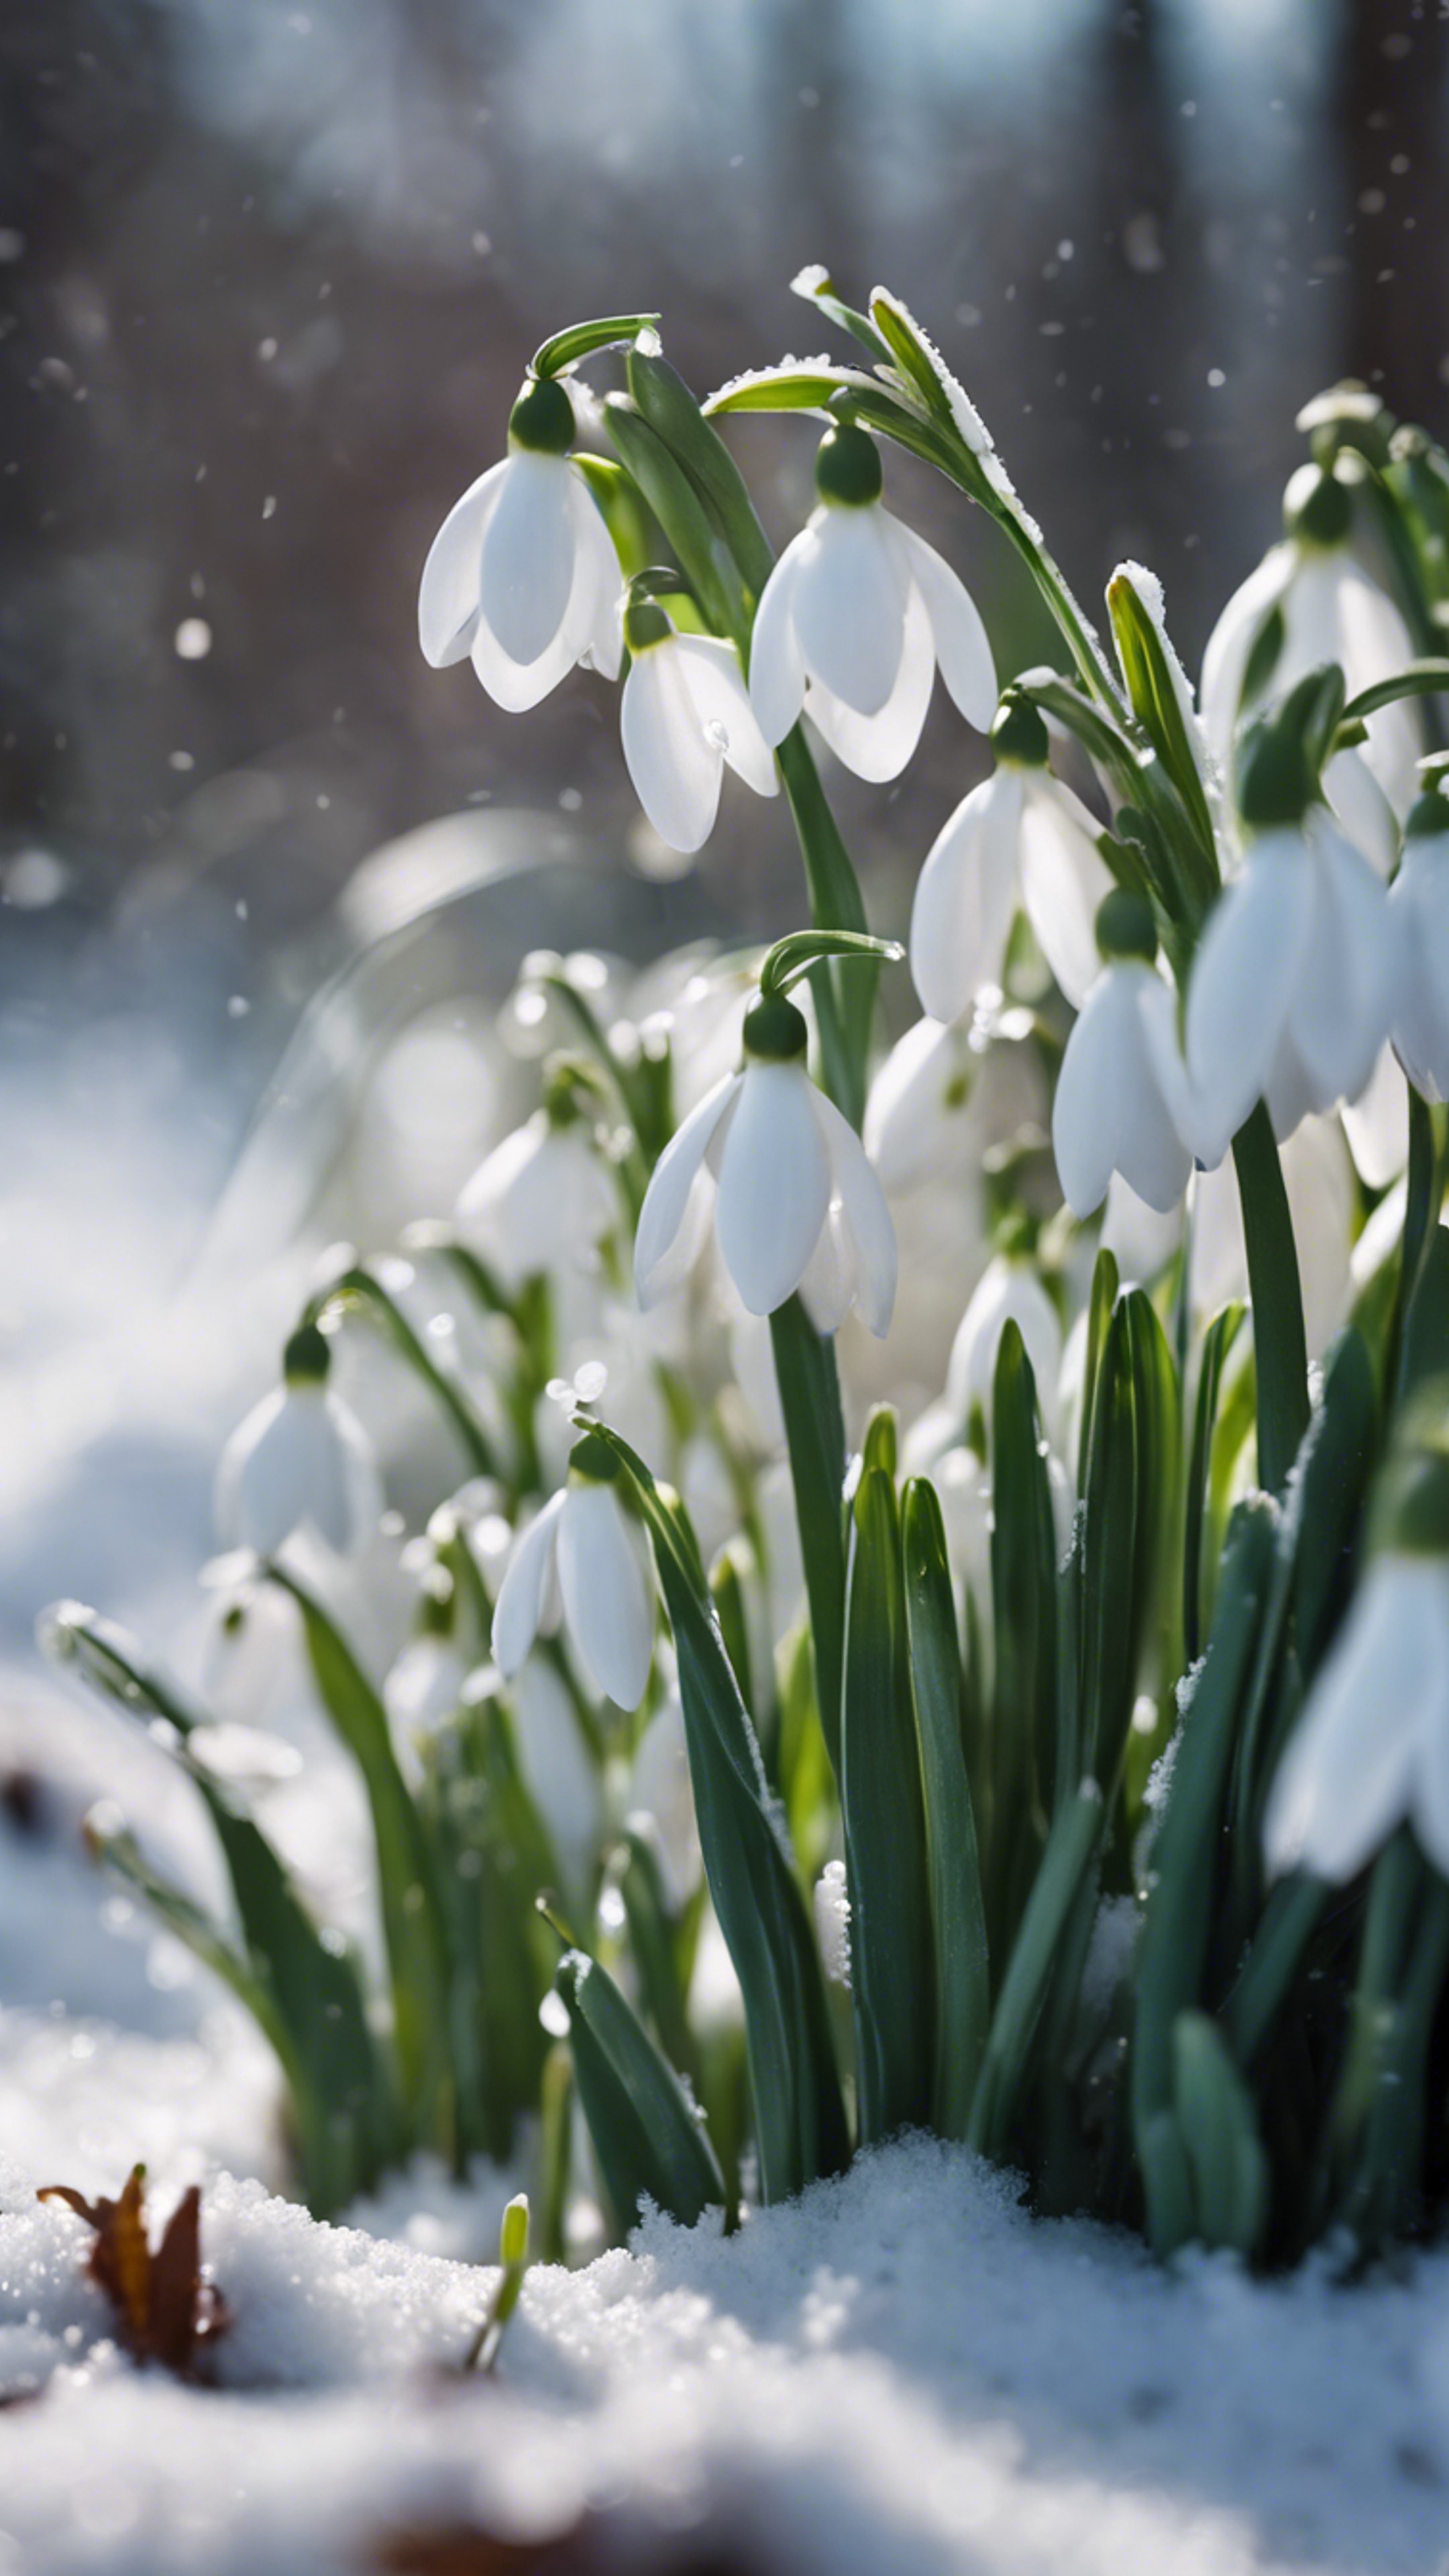 A patch of white snowdrops peeking through a dusting of late spring snow. 벽지[e64c535efd0a459c9840]